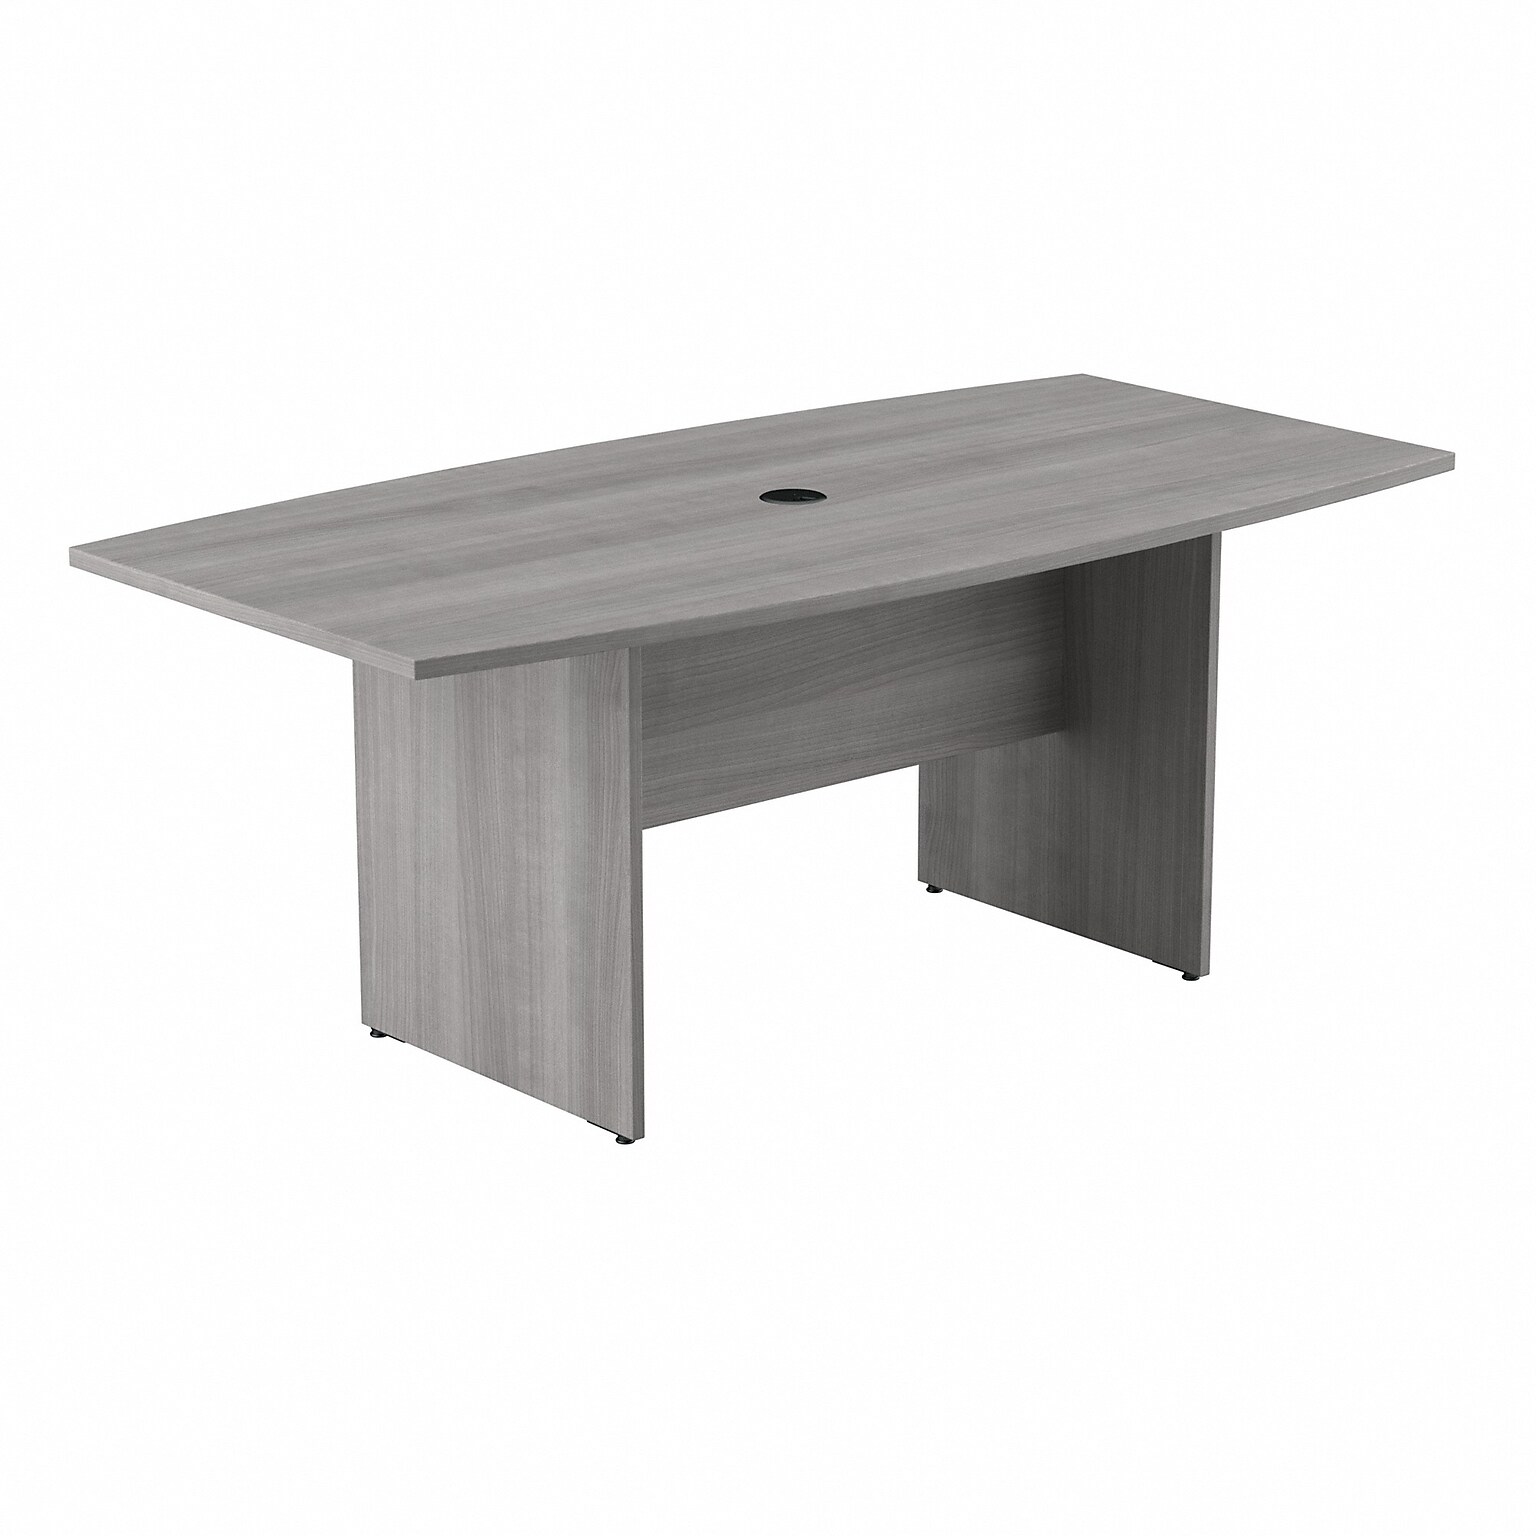 Bush Business Furniture 72W x 36D Boat Shaped Conference Table with Wood Base, Platinum Gray (99TB7236PG)